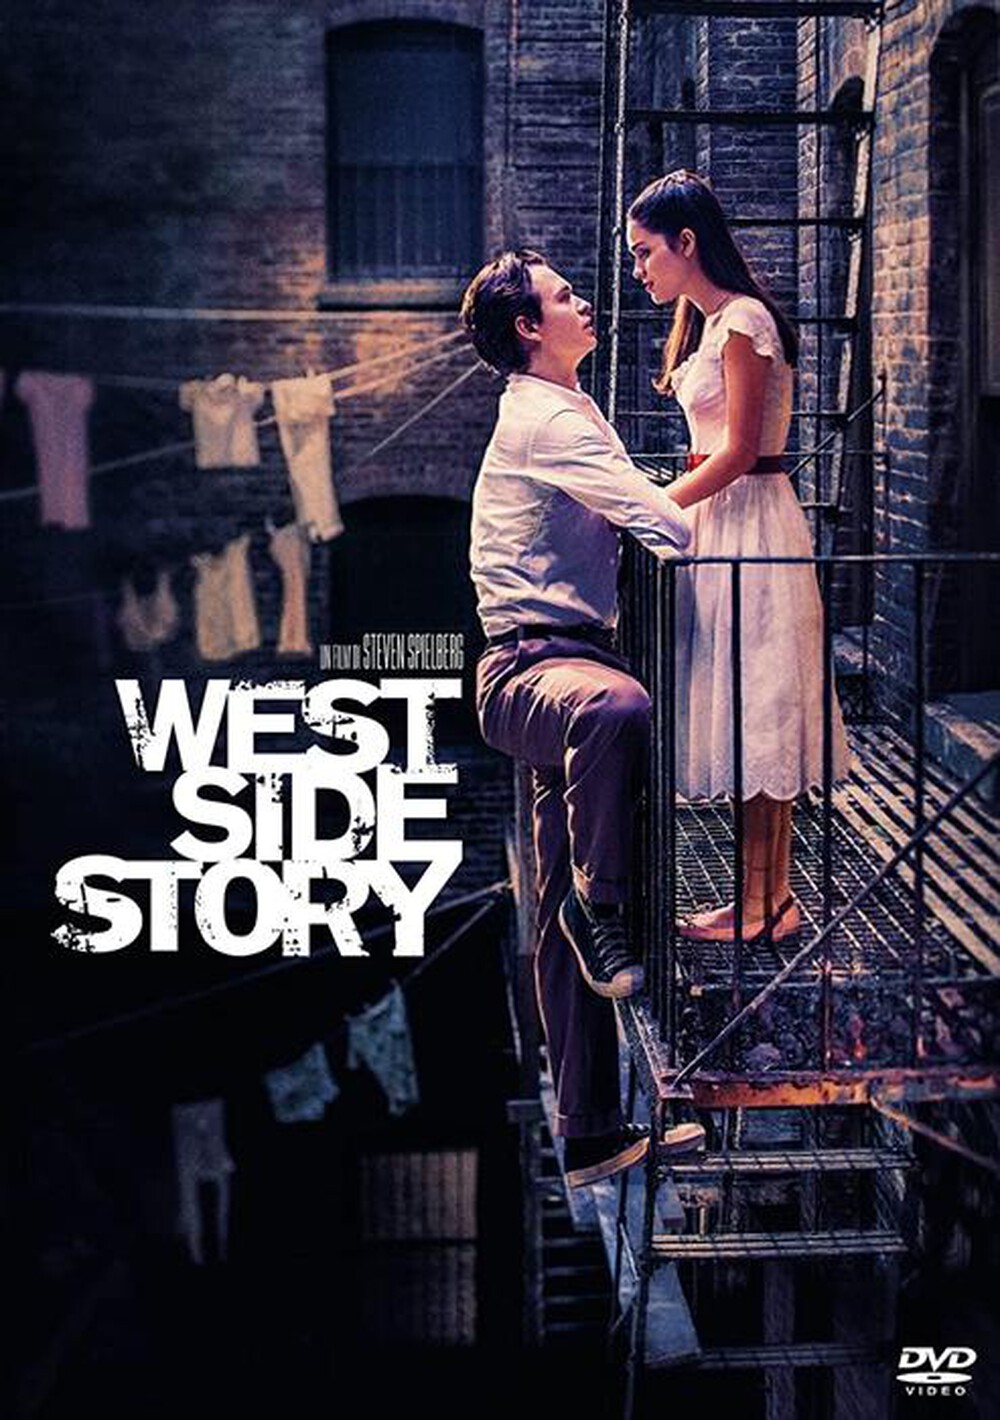 "EAGLE PICTURES - West Side Story"